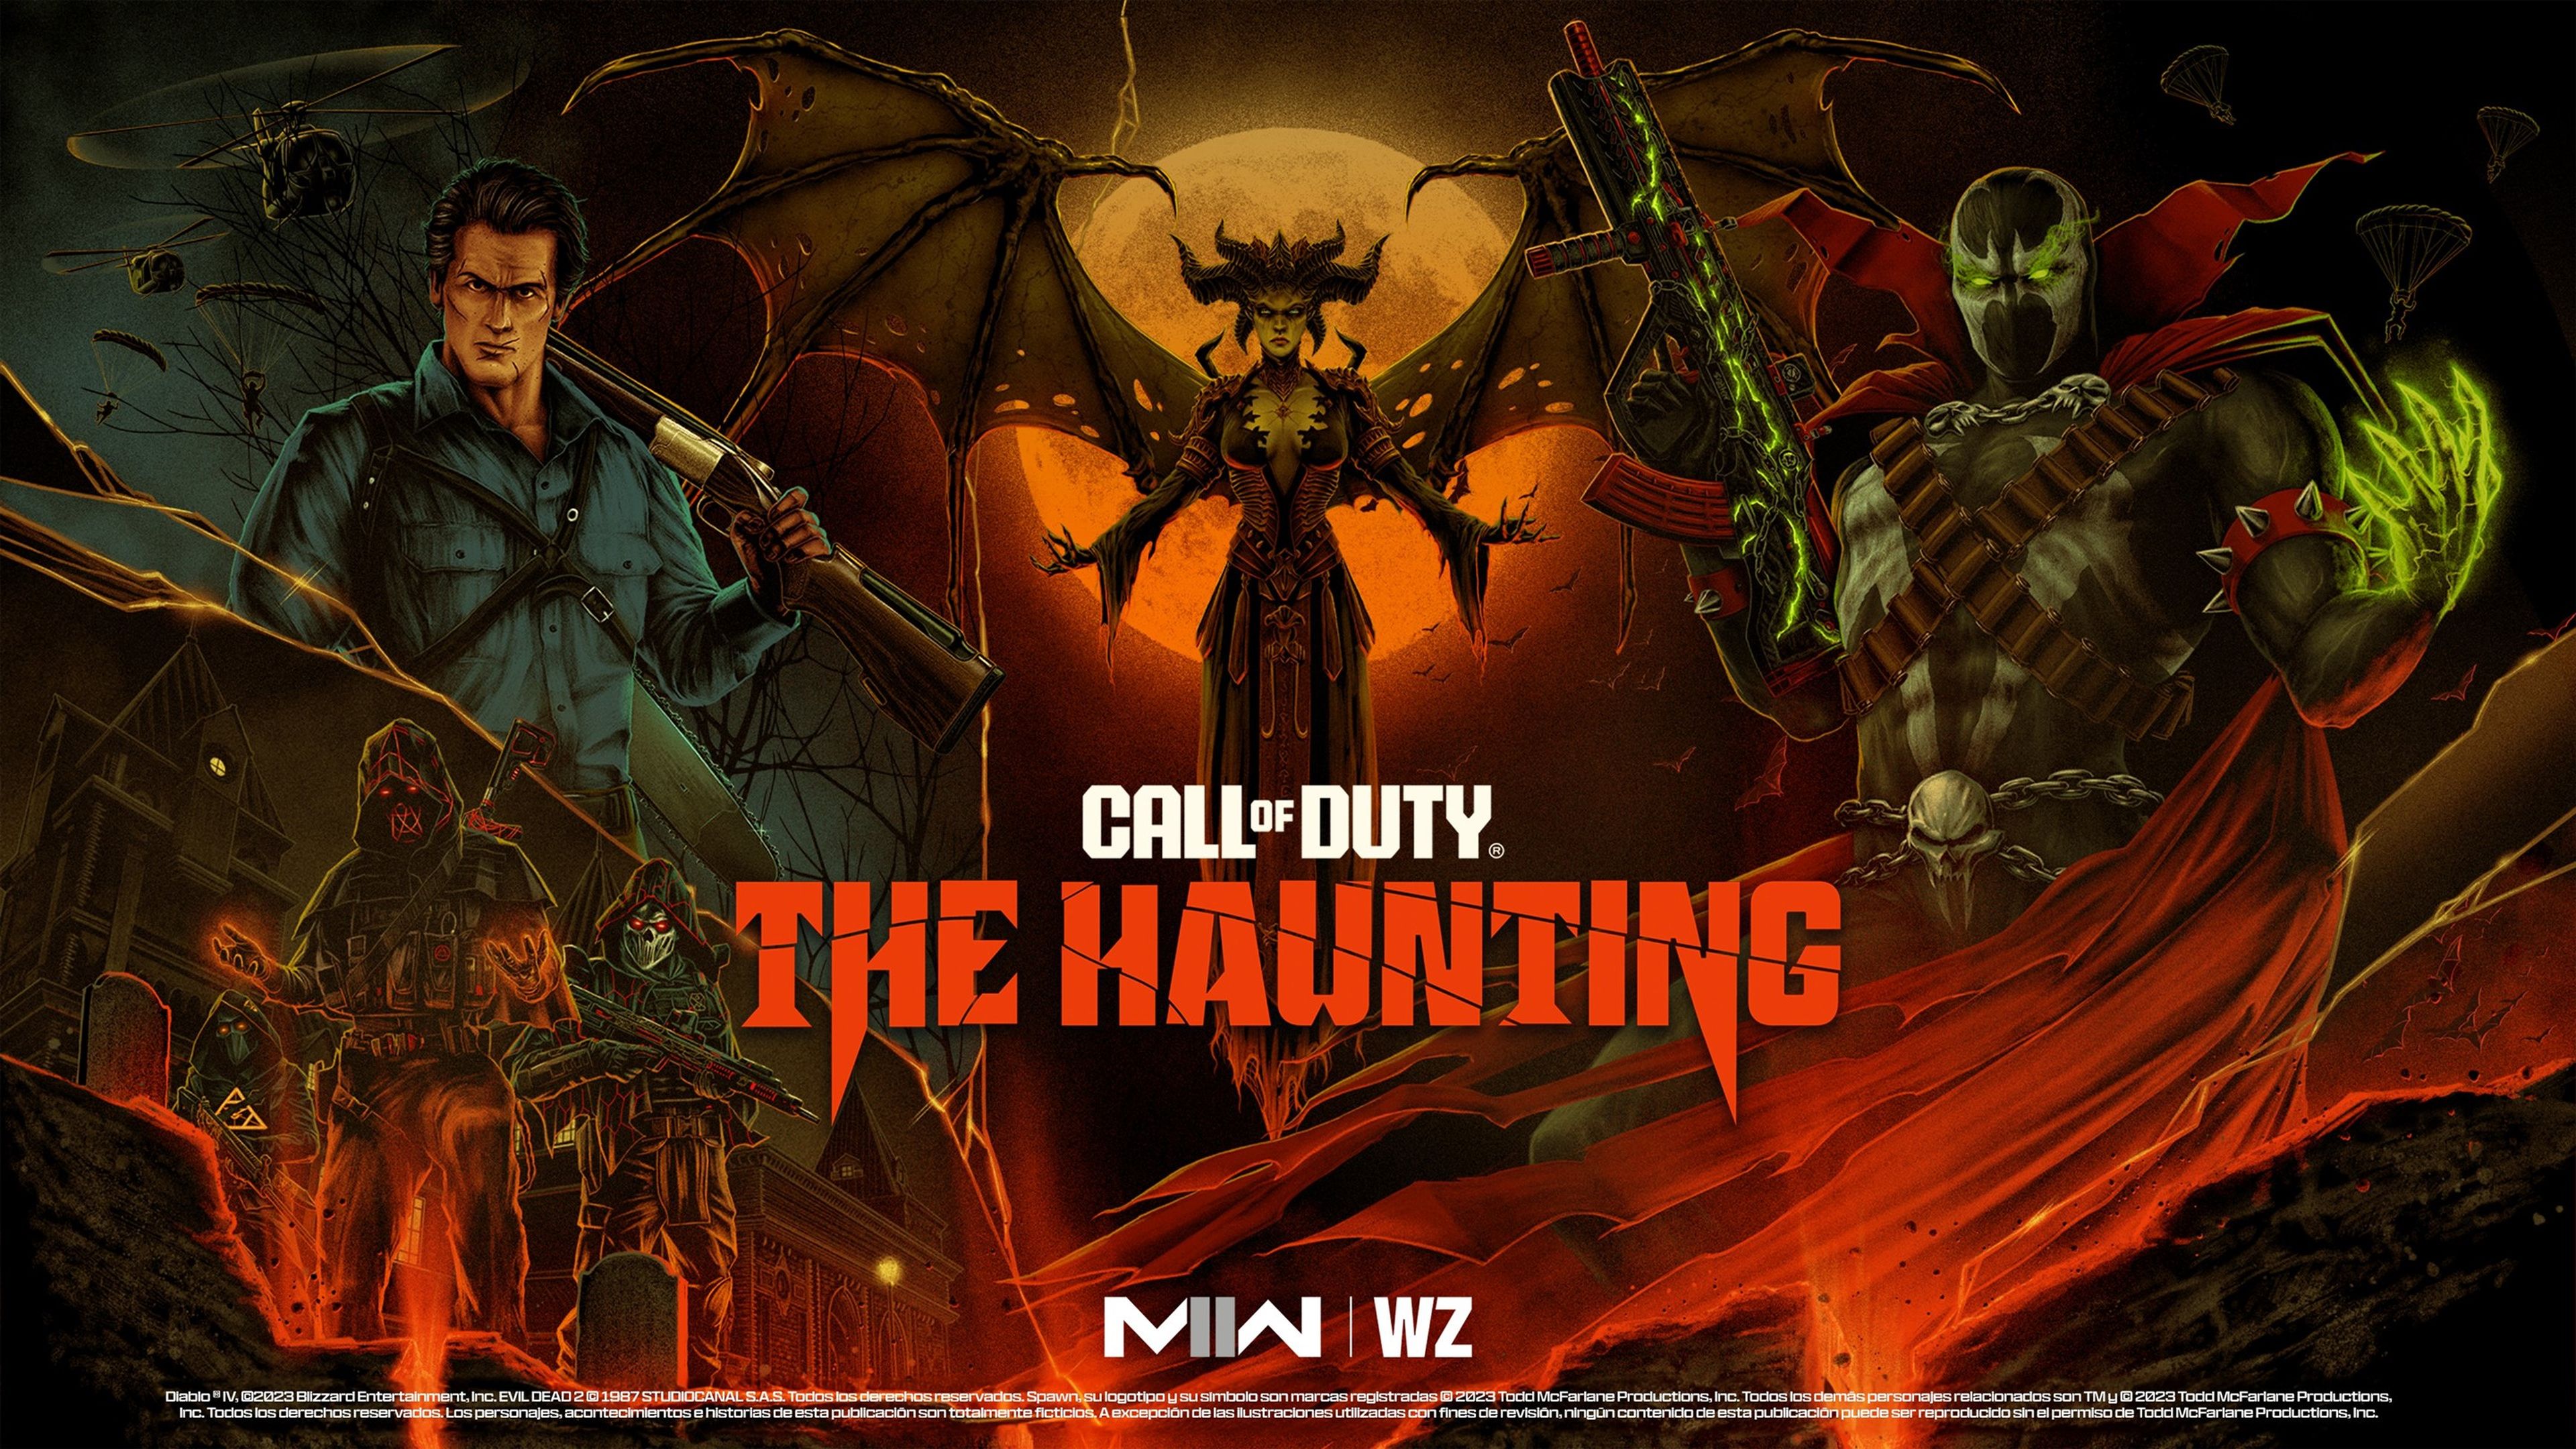 Call of Duty - "The Haunting"